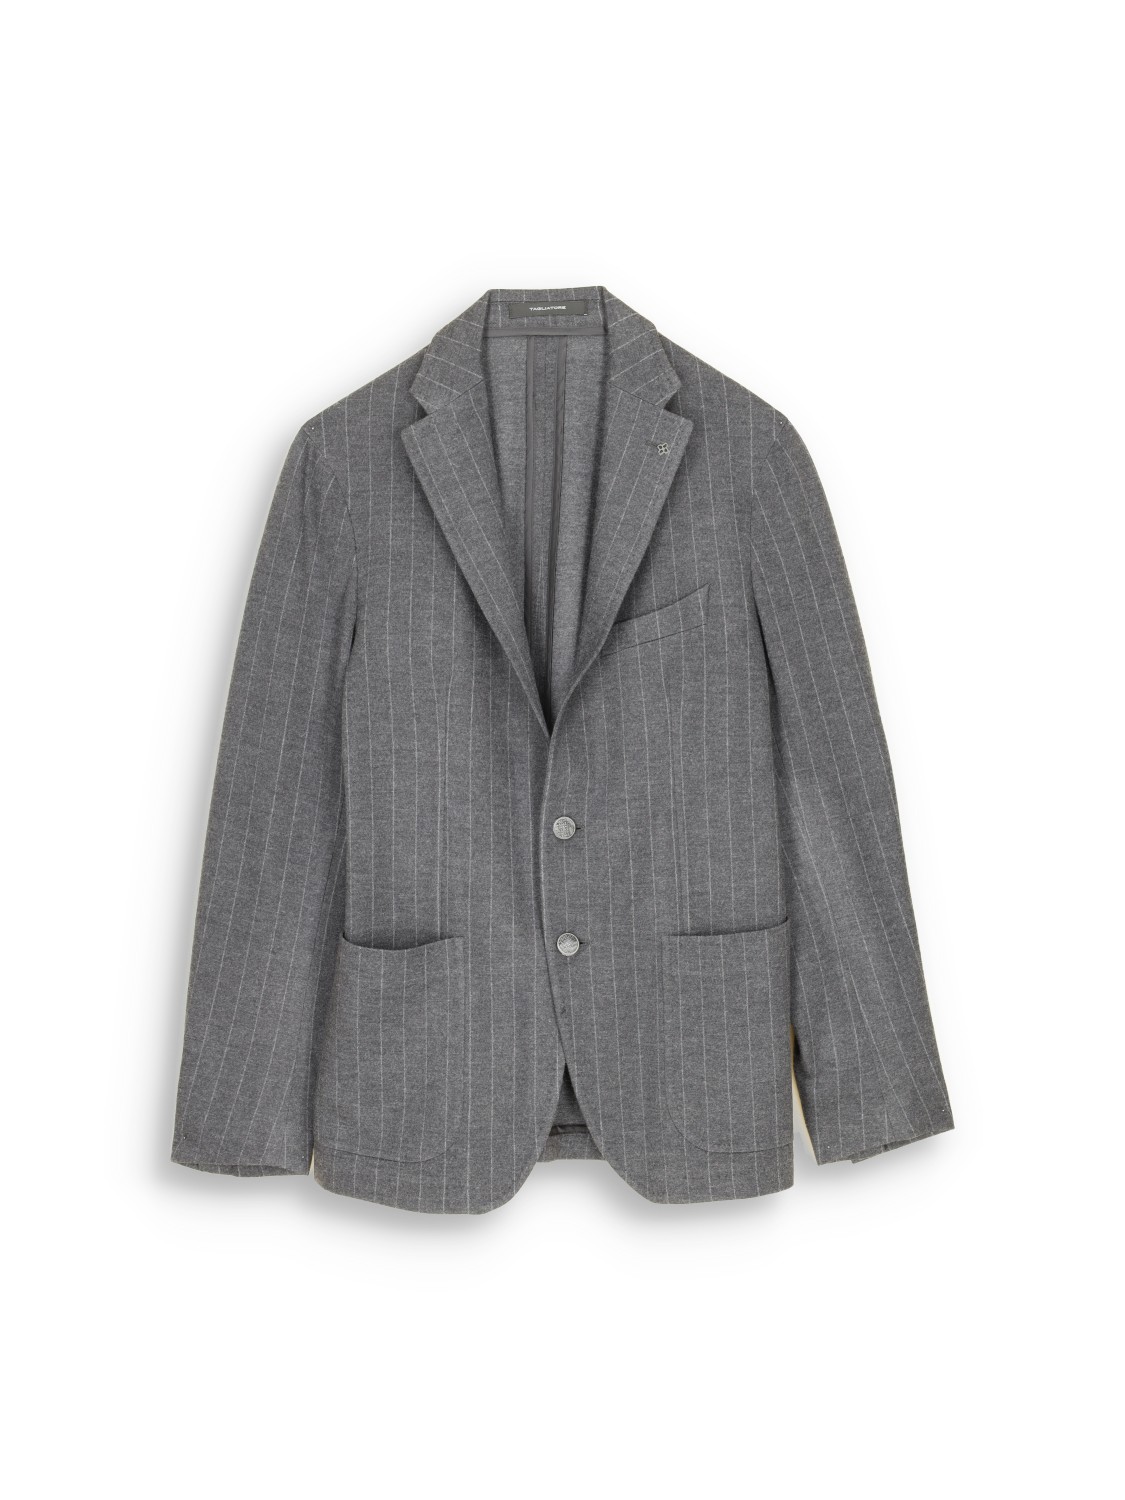 pinstripe suit with pure new wool - pinstripe suit made of virgin wool mix 